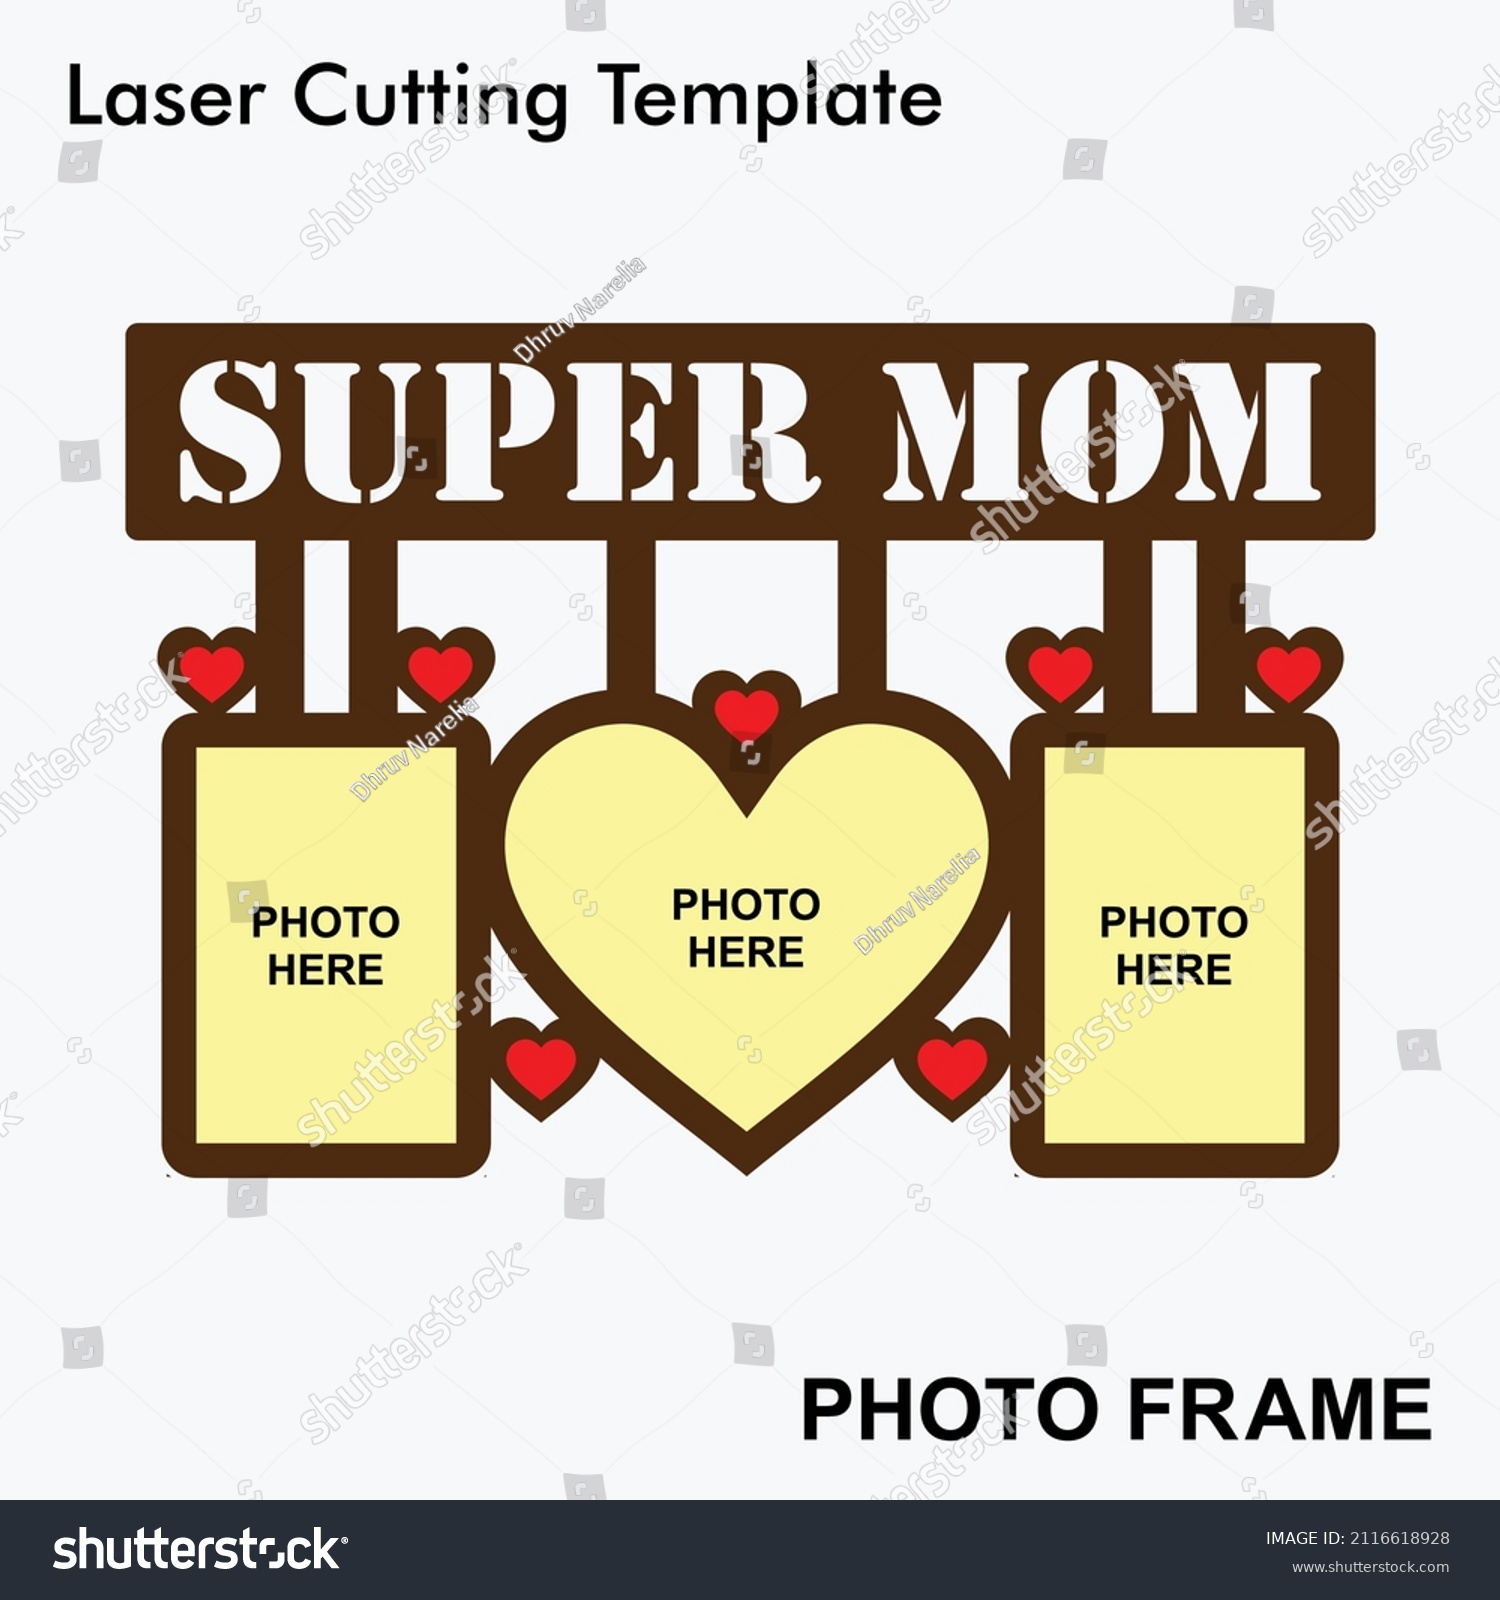 SVG of Super Mom Frame Laser cut photo frame with 3 photos. creative and beautiful frame suitable for Home Decor. Laser cut photo frame template design for mdf and acrylic cutting. svg